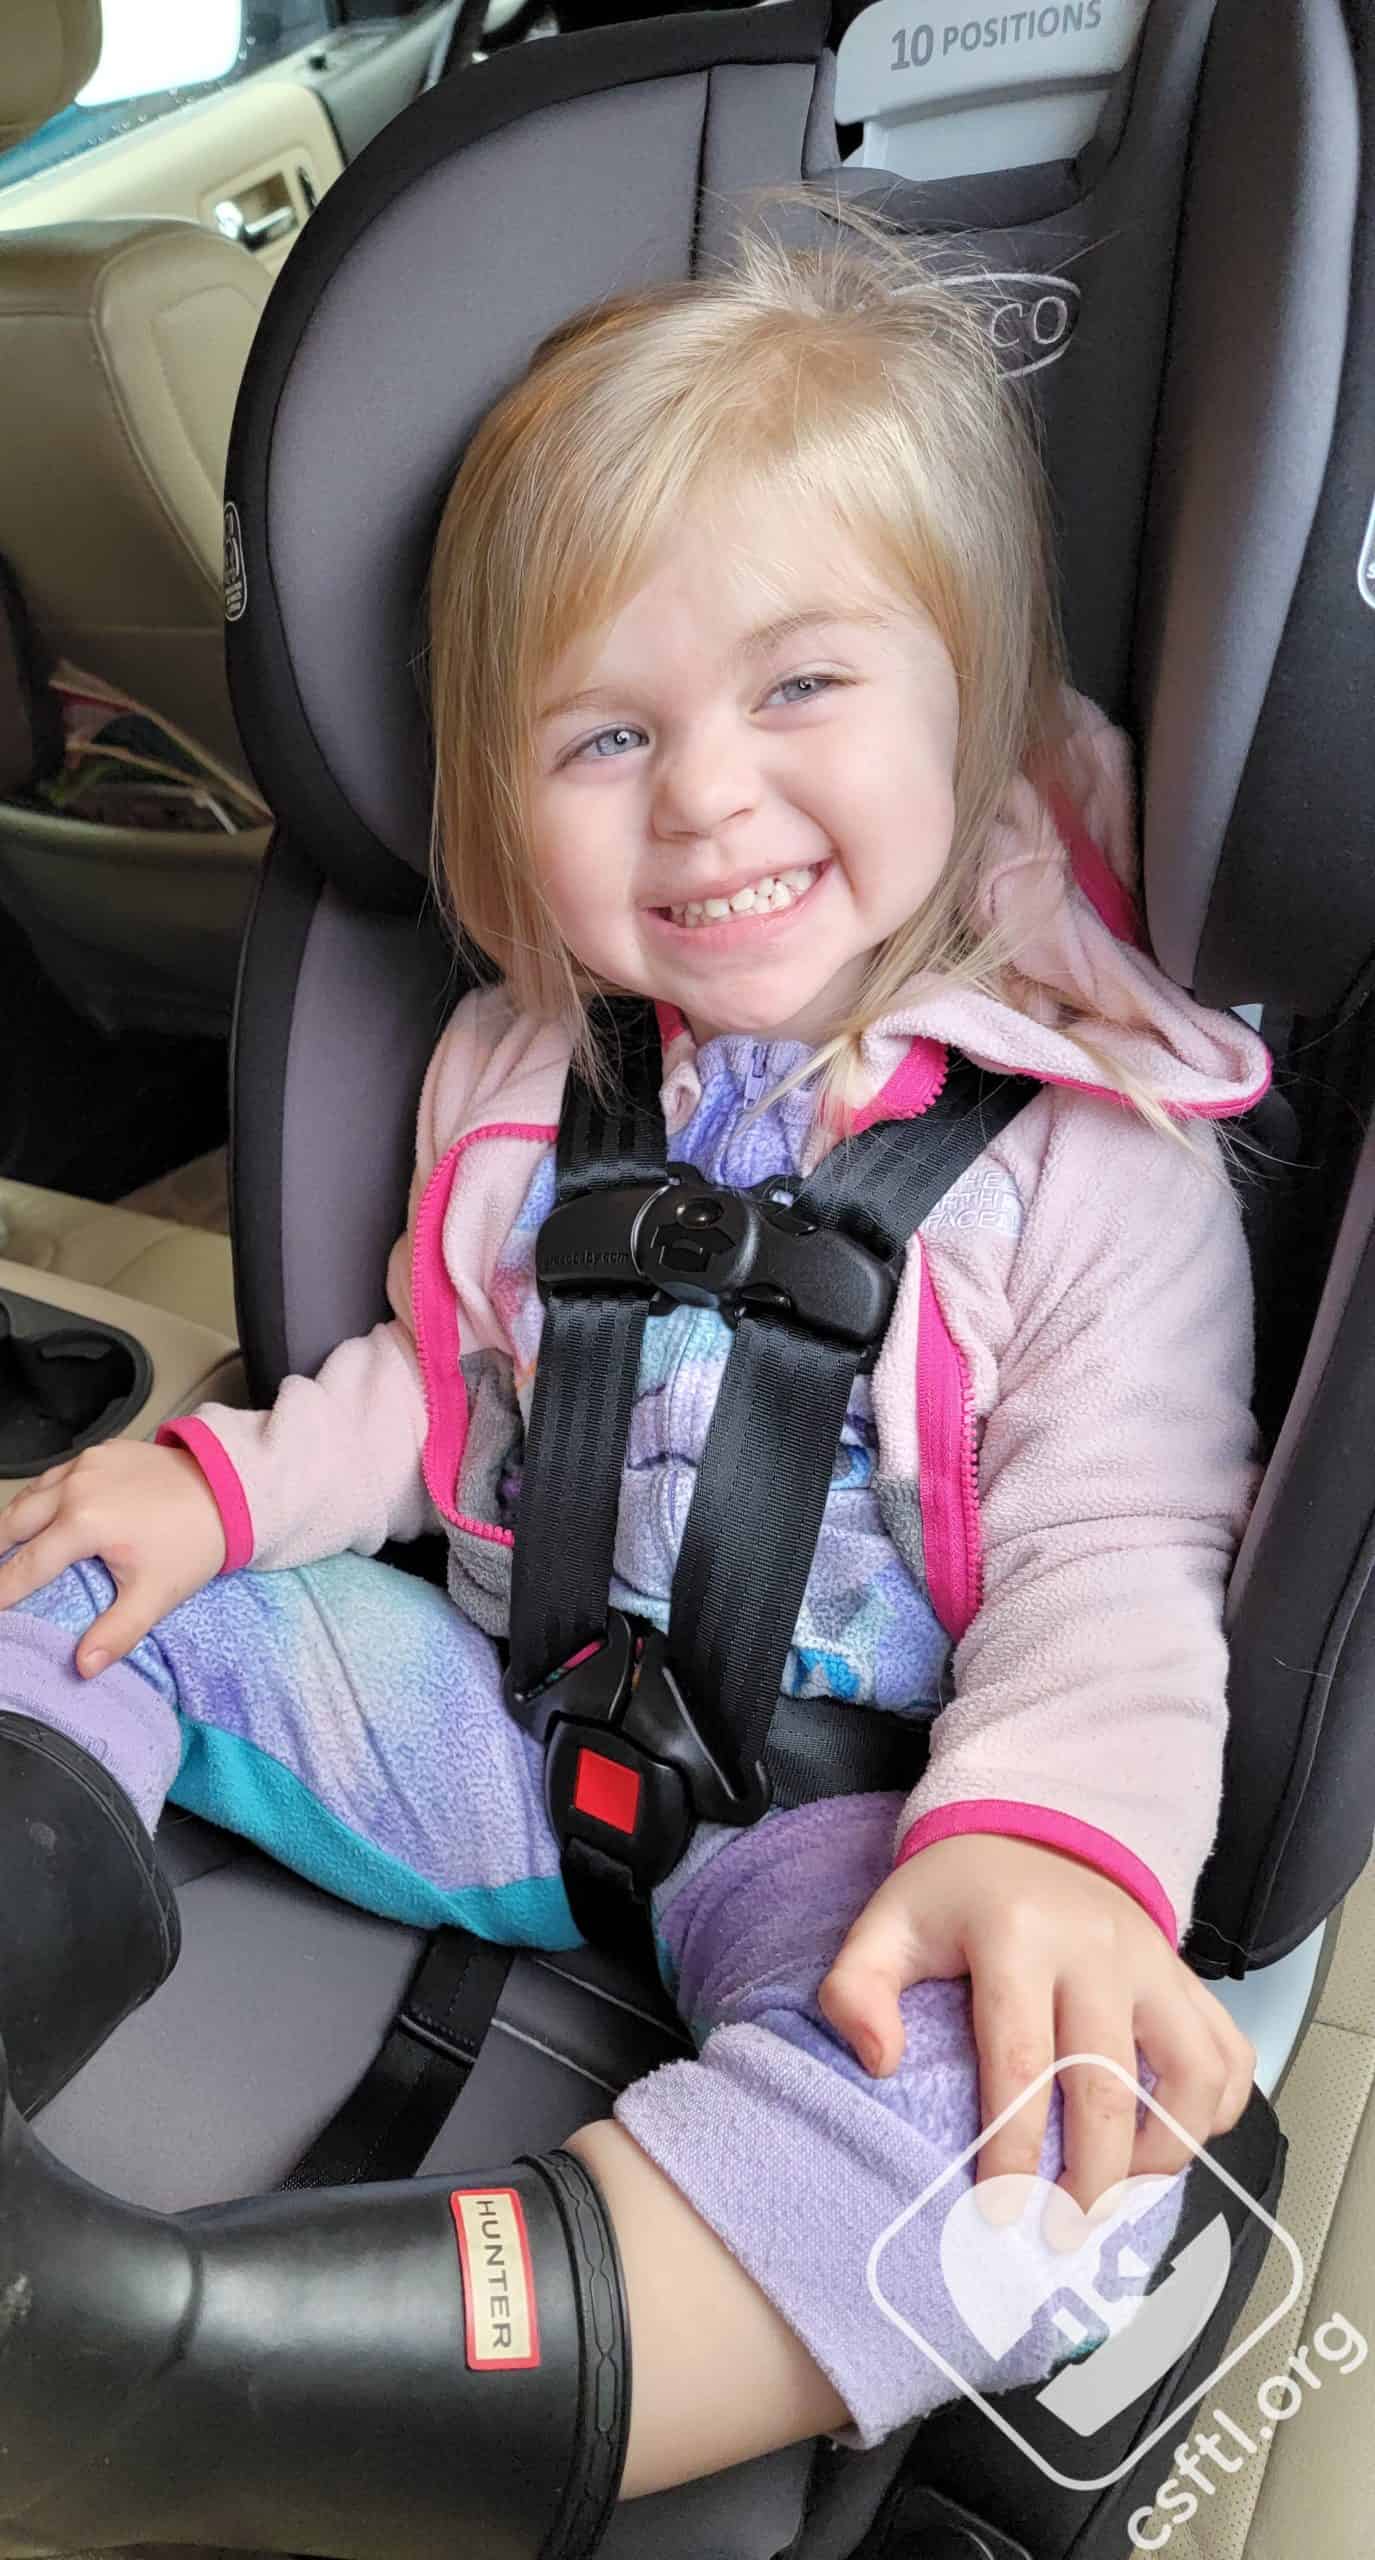 Buckle Up: Every Drive Matters! - Car Seats For The Littles